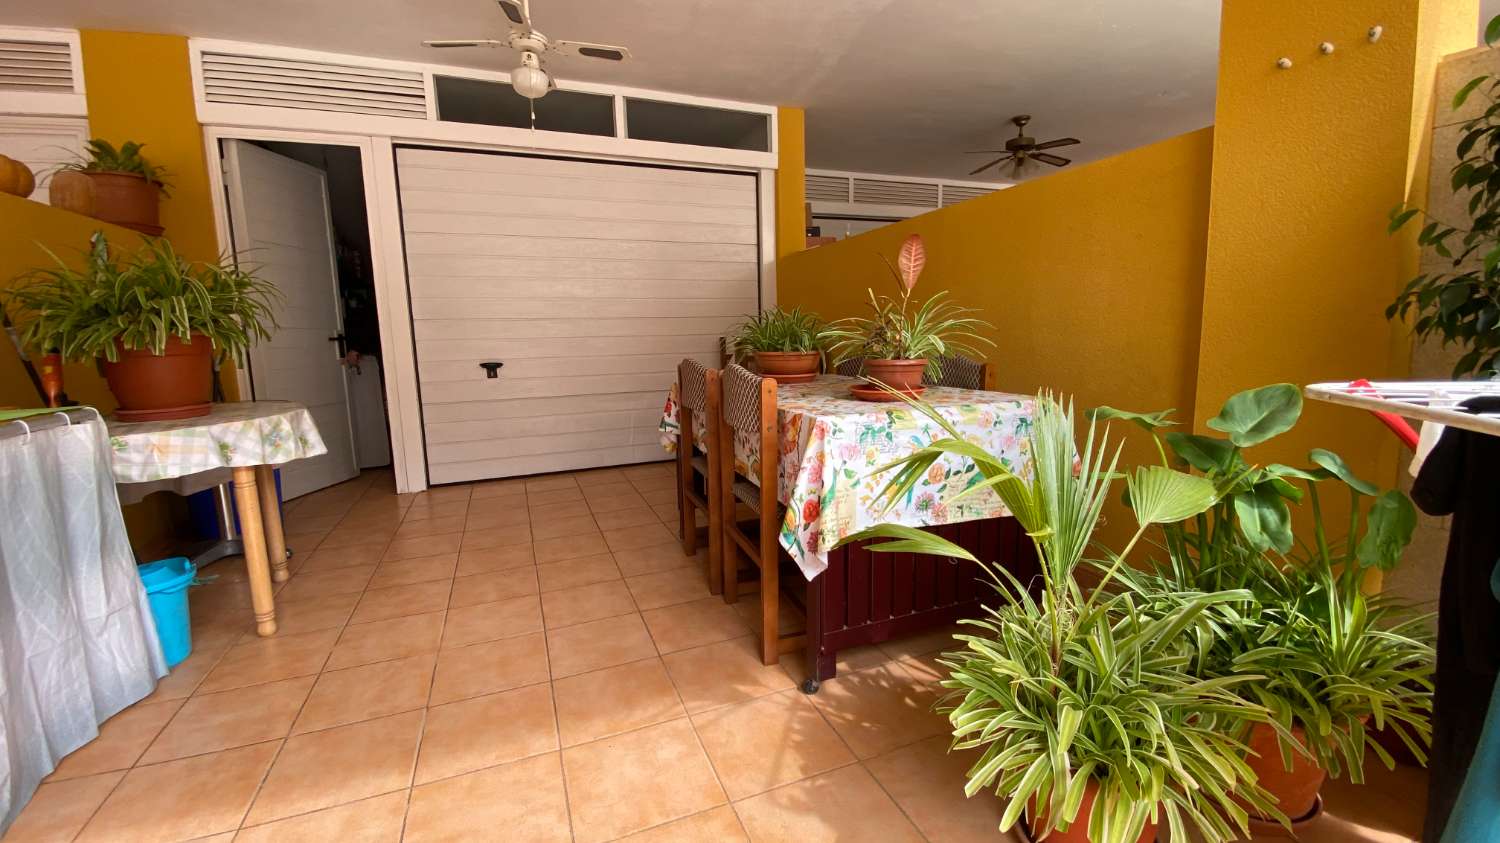 Duplex, with three floors. Two bedrooms, two bathrooms, living room, separate kitchen. Communal swimming pool. Garage and large covered porch with barbecue